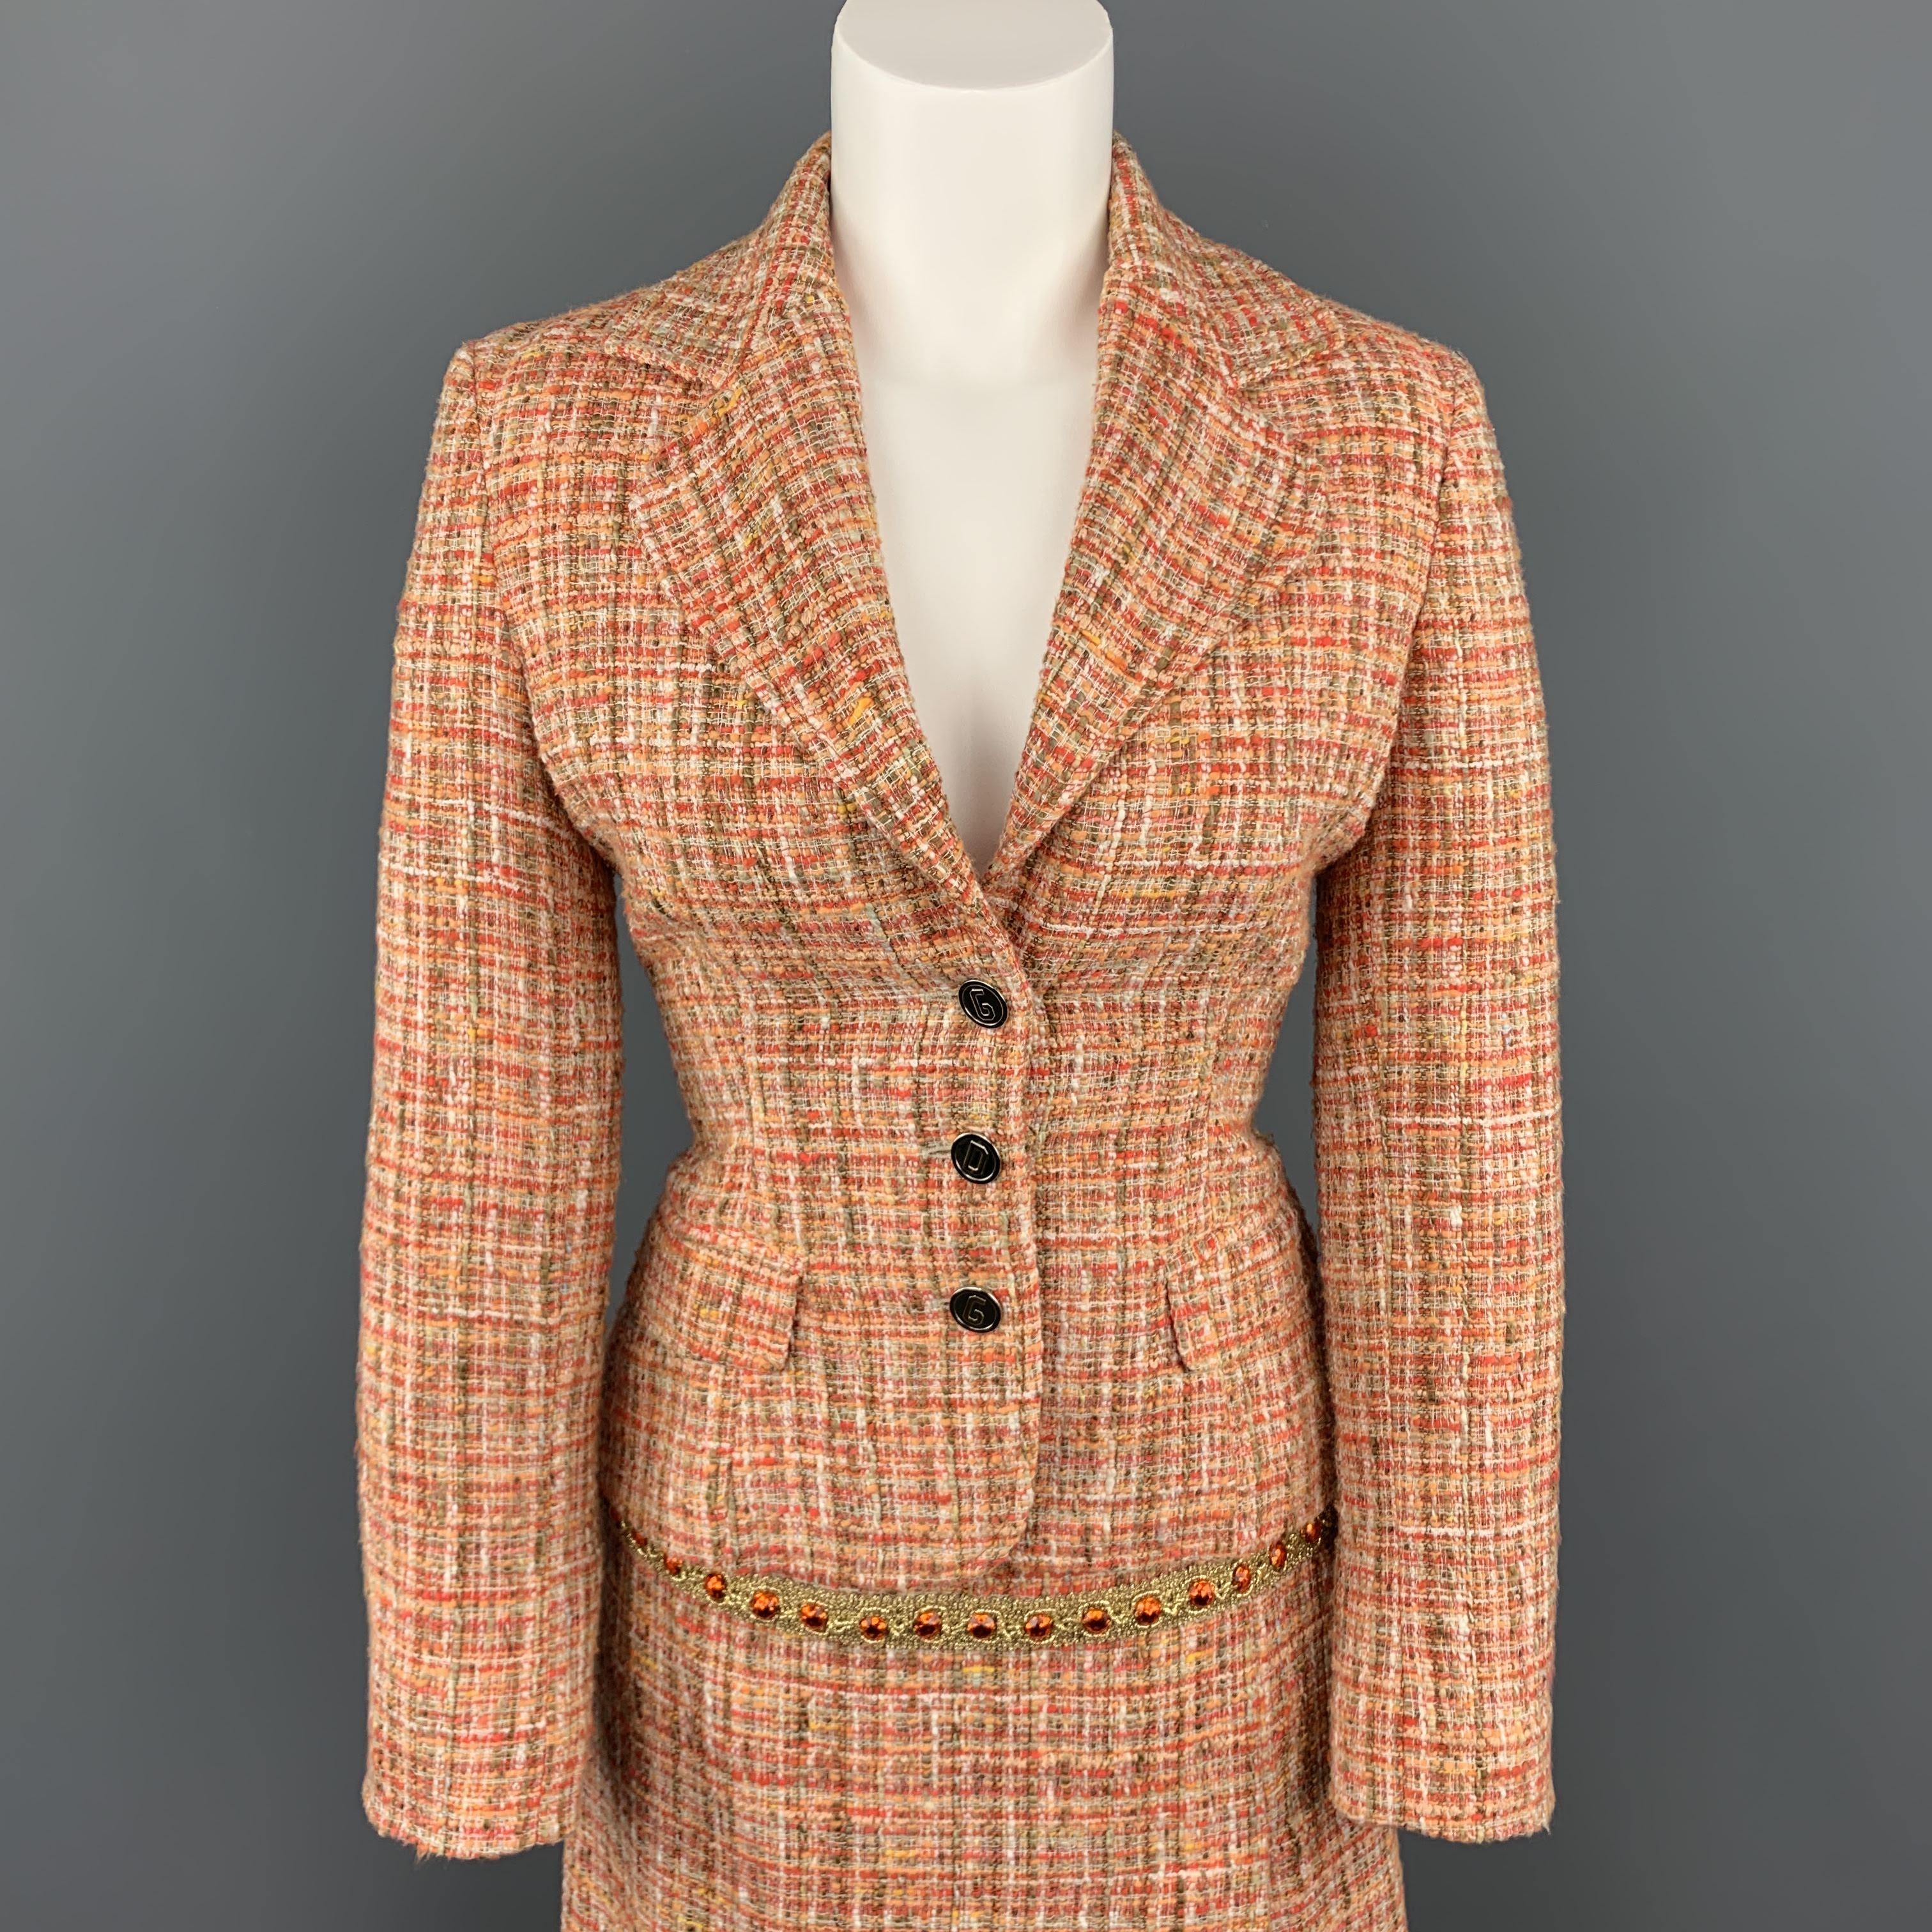 Vintage DOLCE & GABBANA suit comes in orange cotton blend tweed and includes a cropped blazer with metal D G buttons and notch lapel with matching slit pencil skirt embellished with orange jewels. Made in Italy.
 
Excellent Pre-Owned